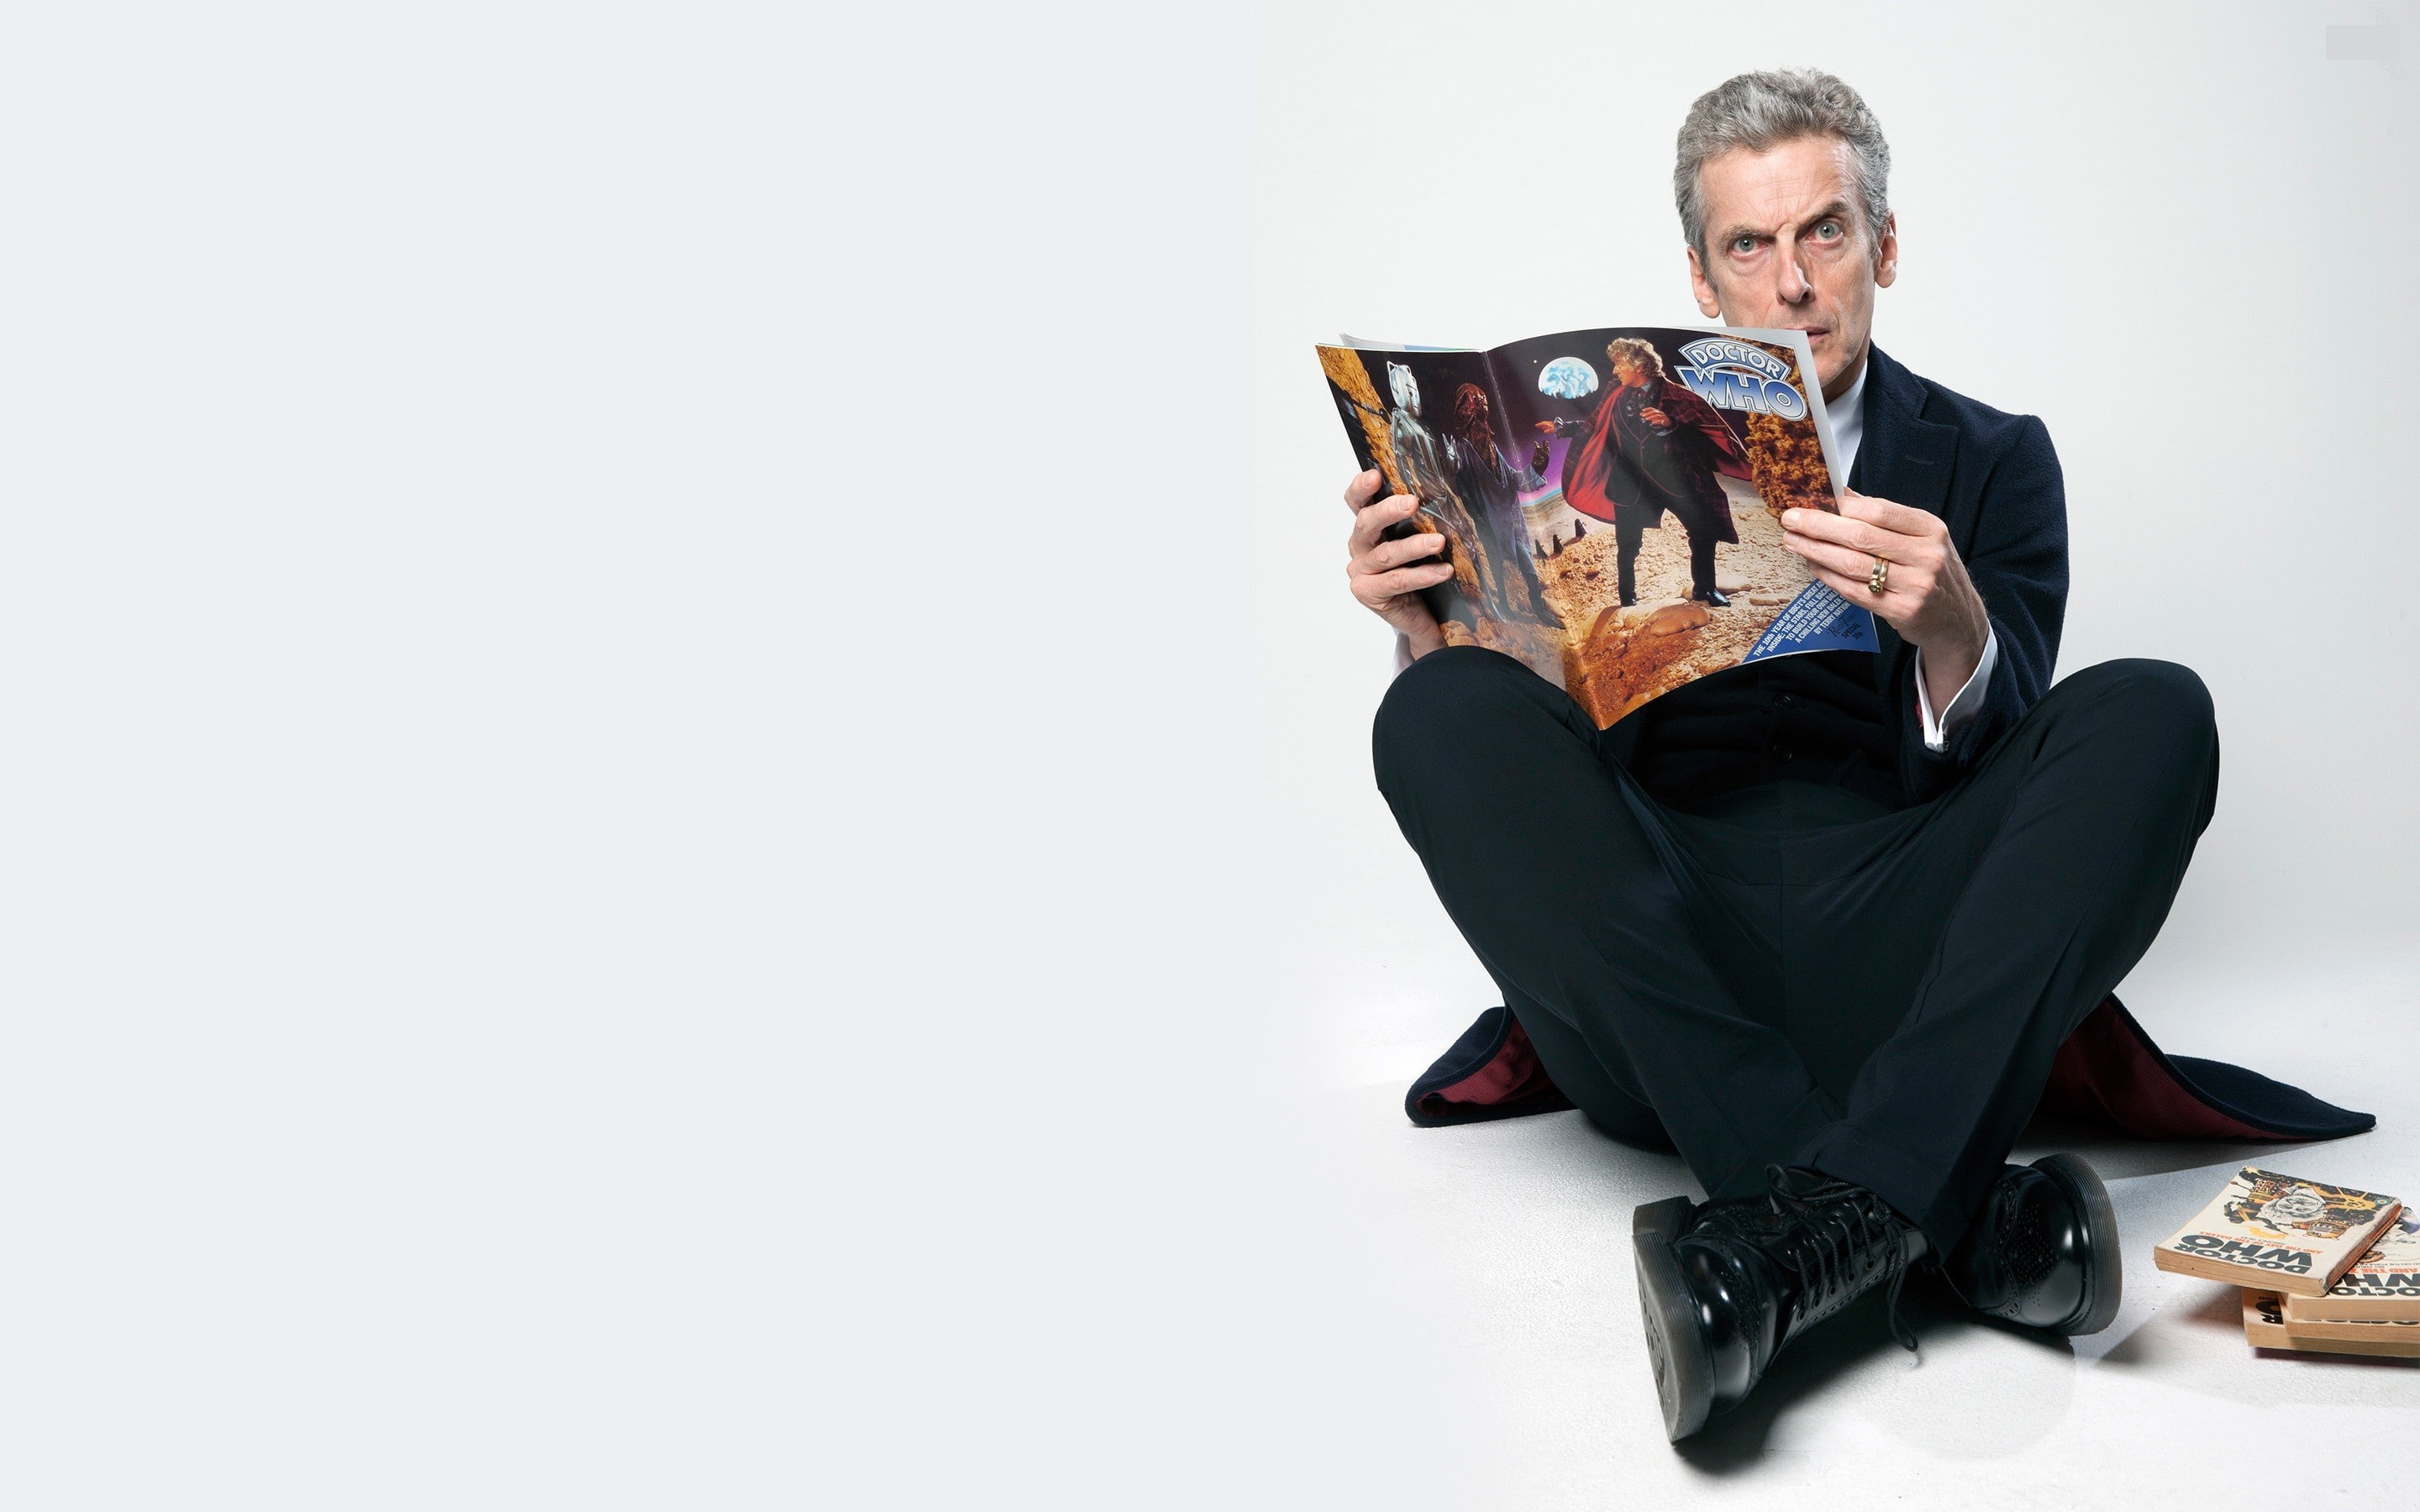 doctor who the doctor peter capaldi, males, mature adult, white background